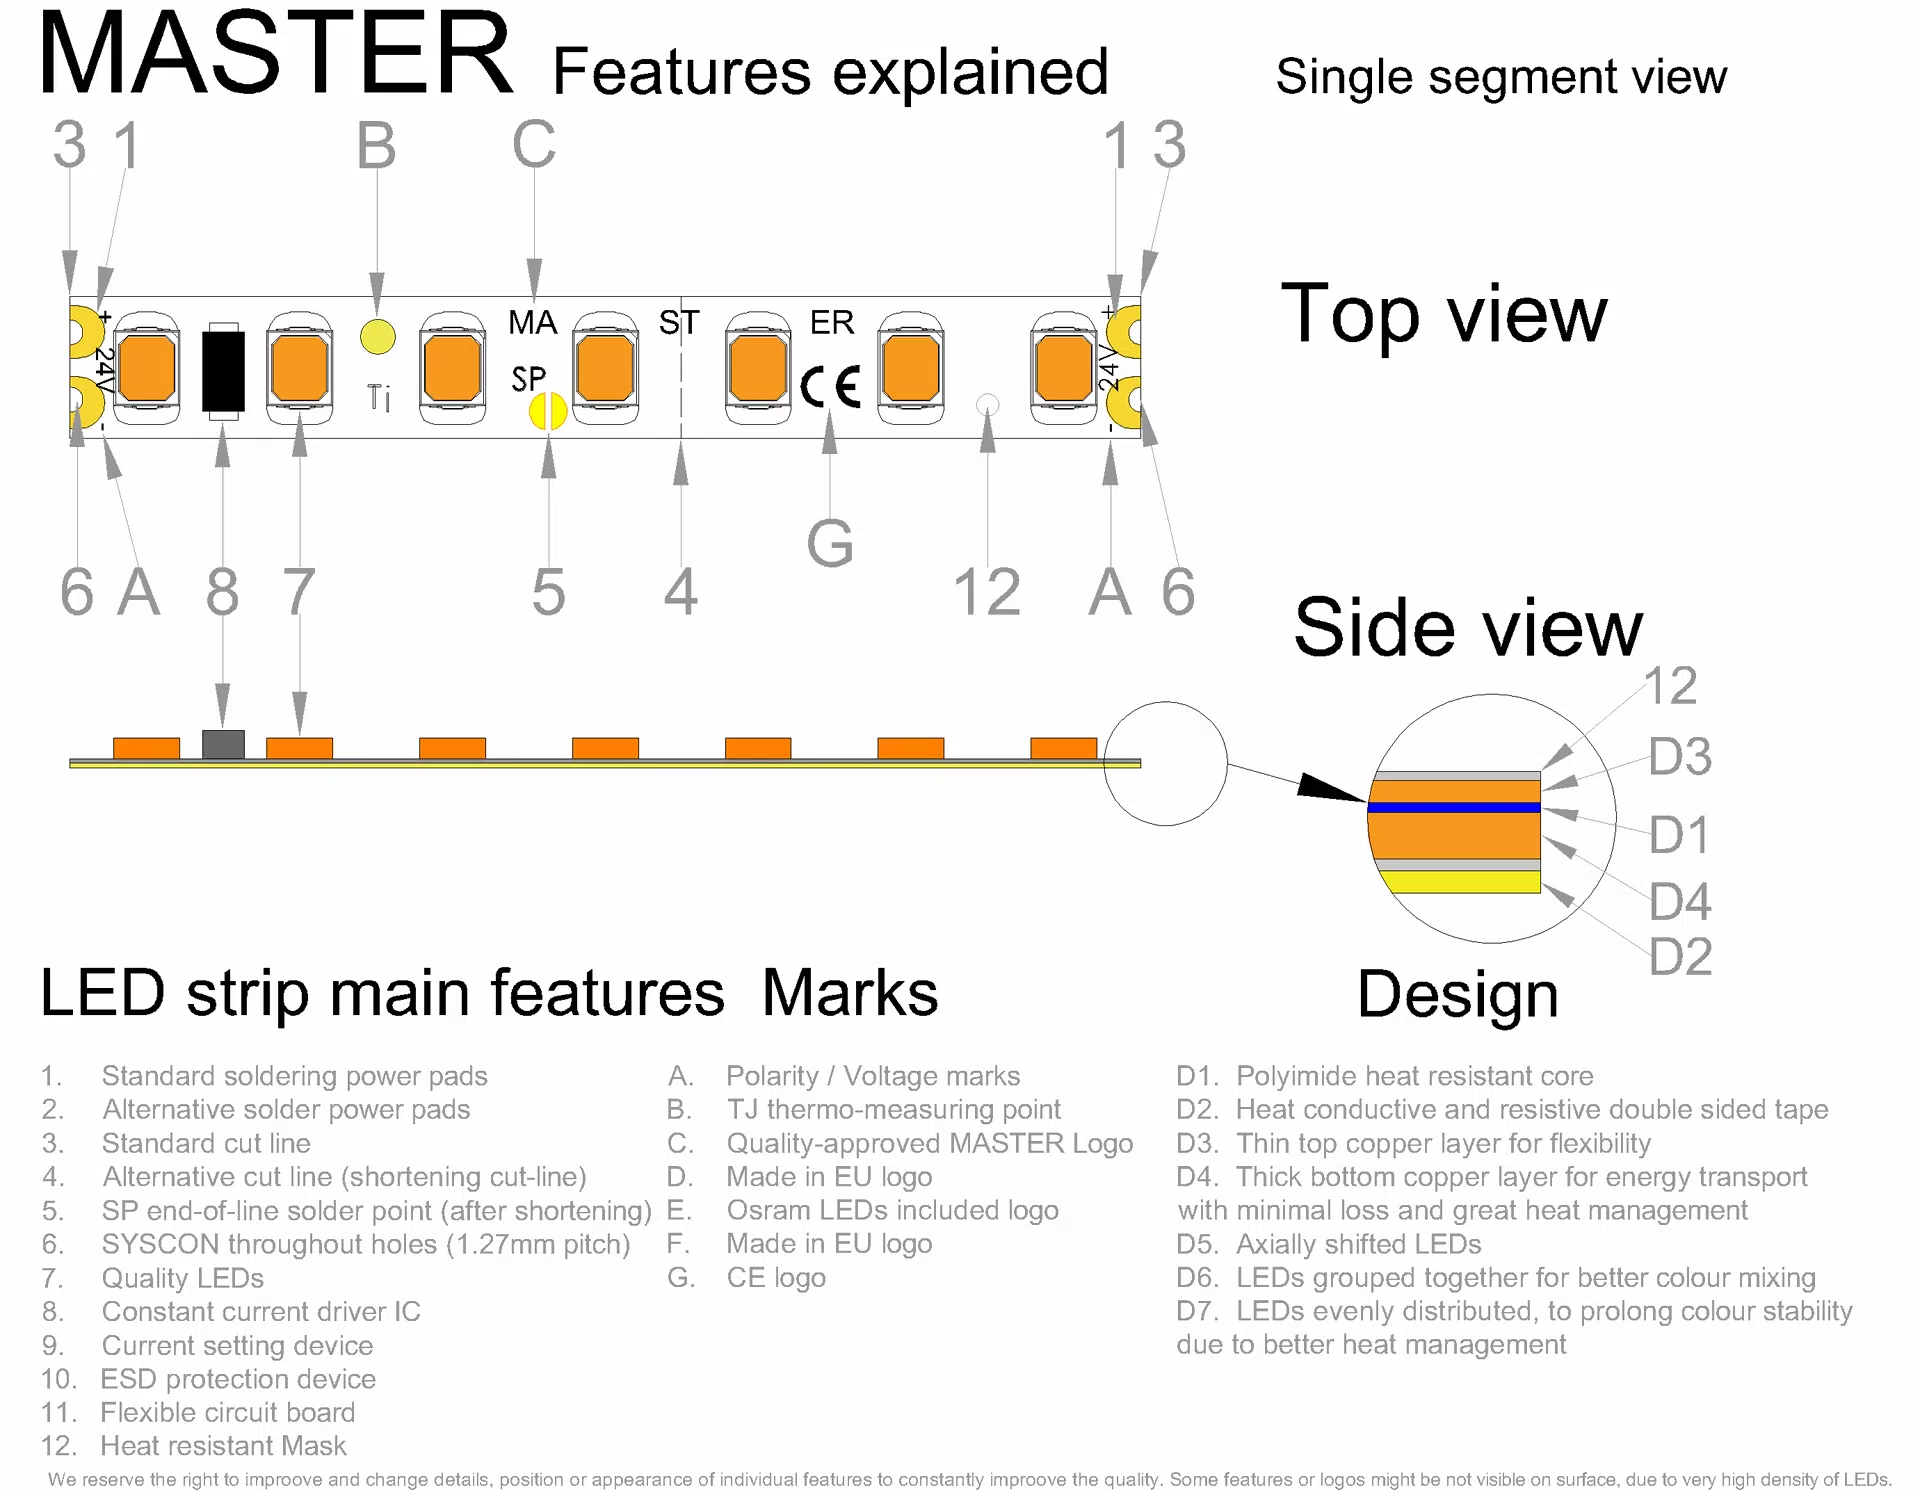 MASTER SUPERNARROW LED strip segment drawing with all features explained